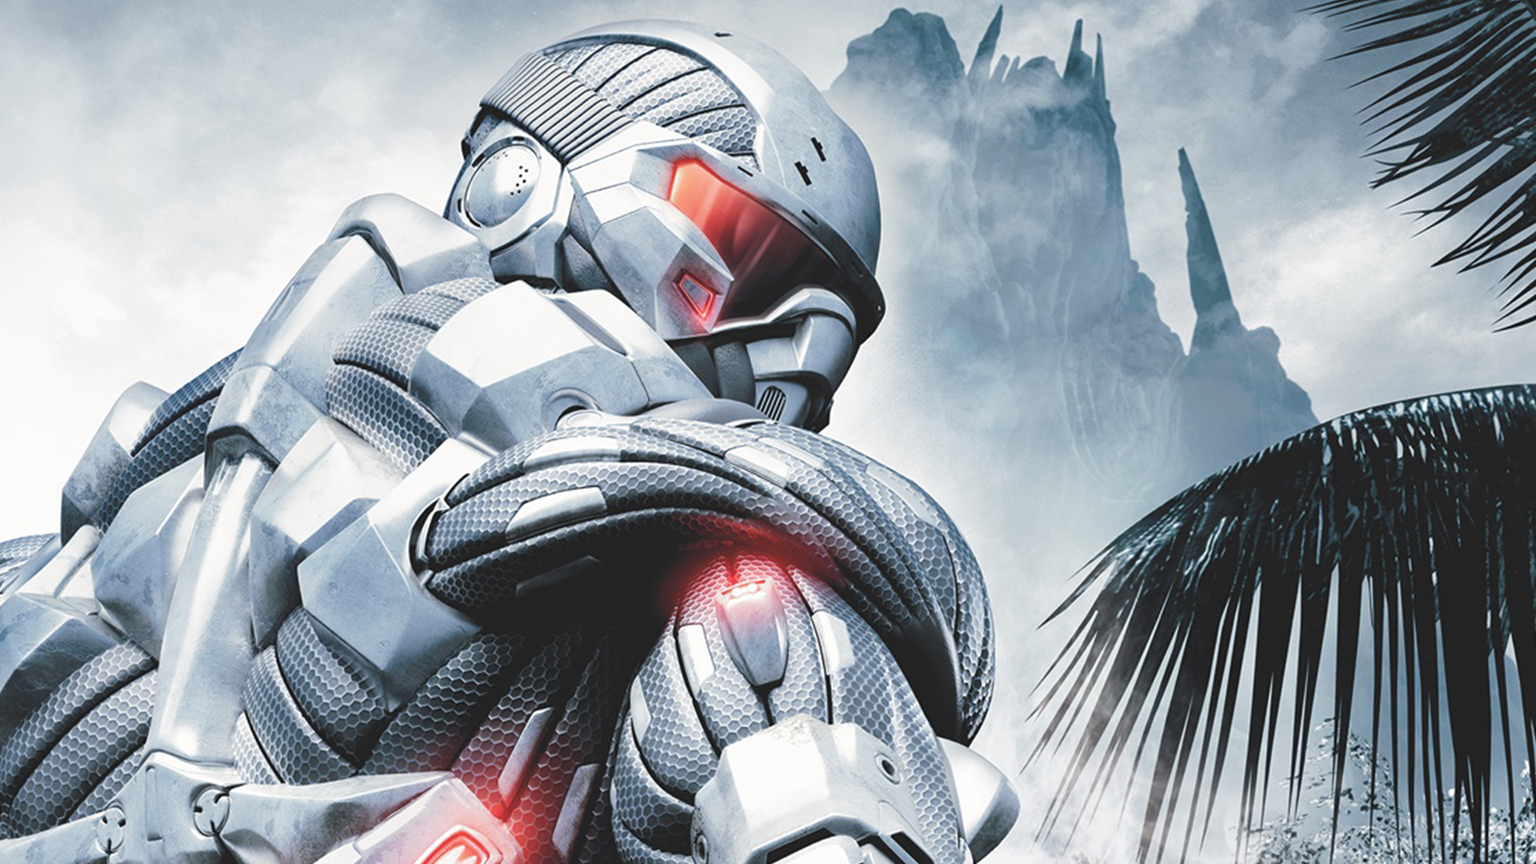 Crysis Android/iOS Mobile Version Full Free Download